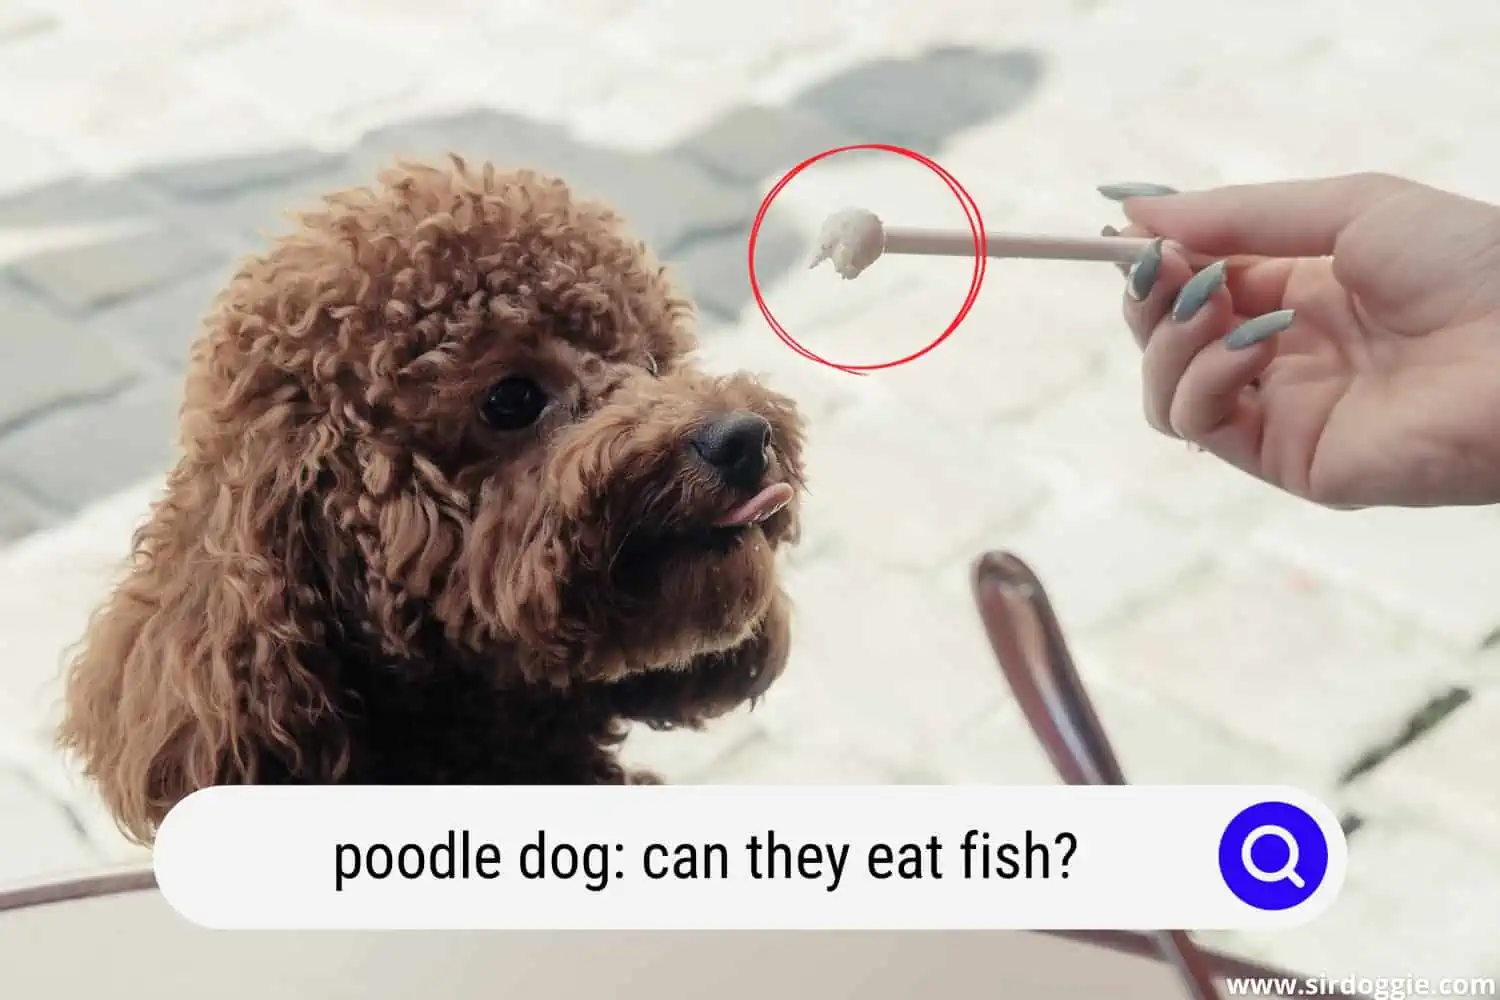 owner feeding poodle dog with fish